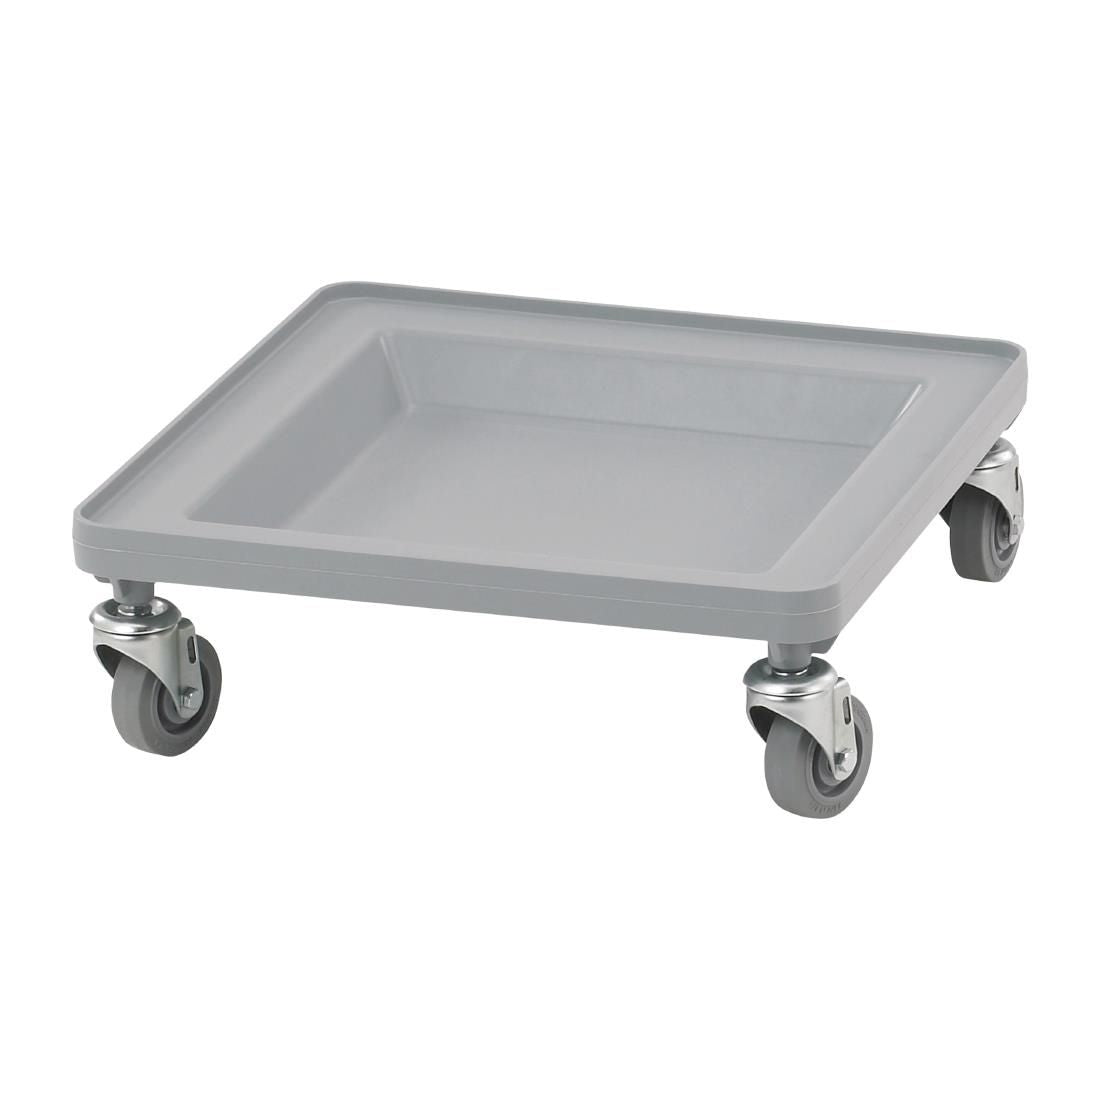 CT307 Cambro Camdolly for Camracks JD Catering Equipment Solutions Ltd